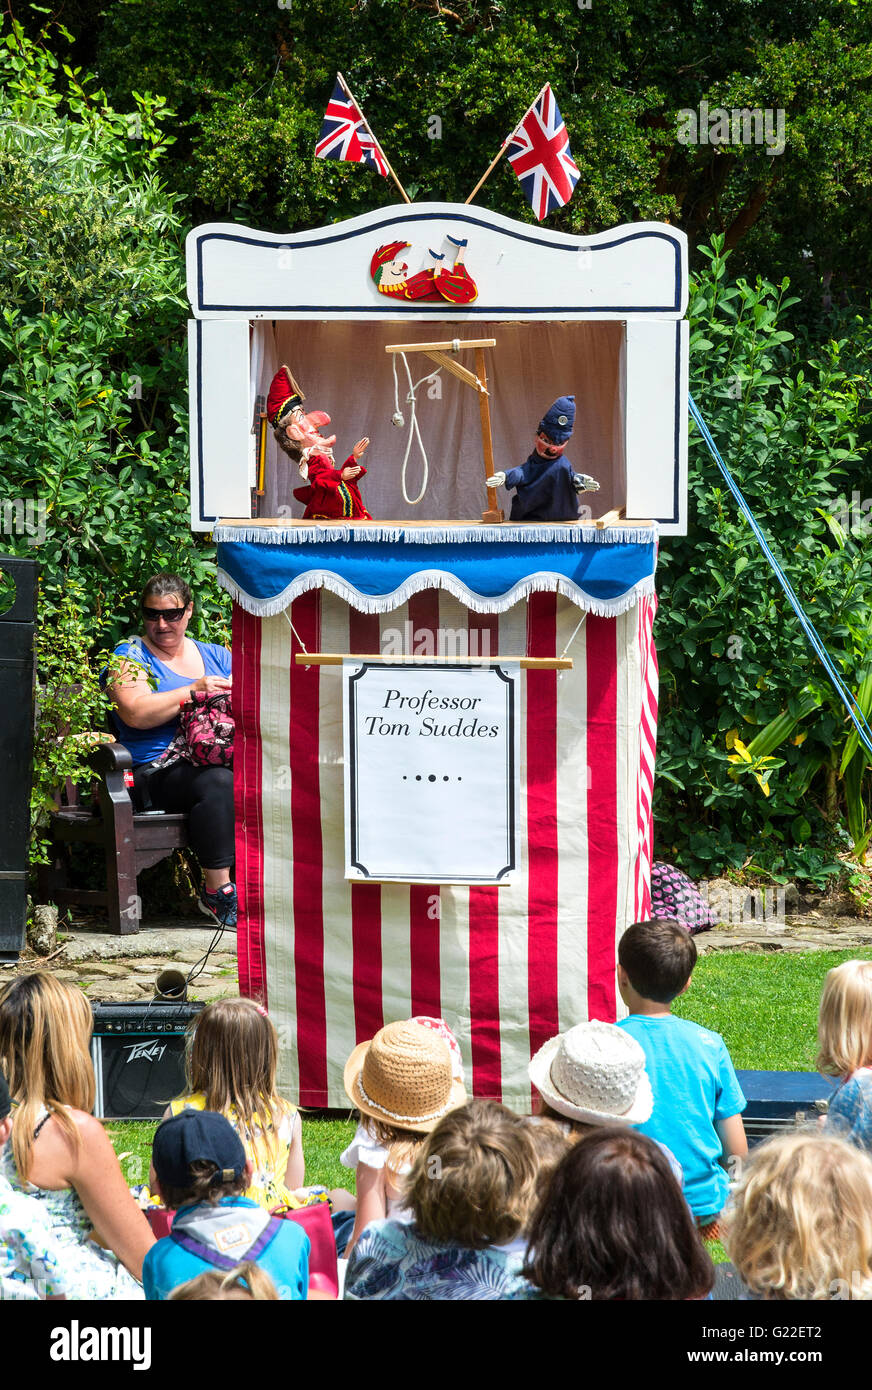 Children watching a traditional Punch and Judy show Stock Photo